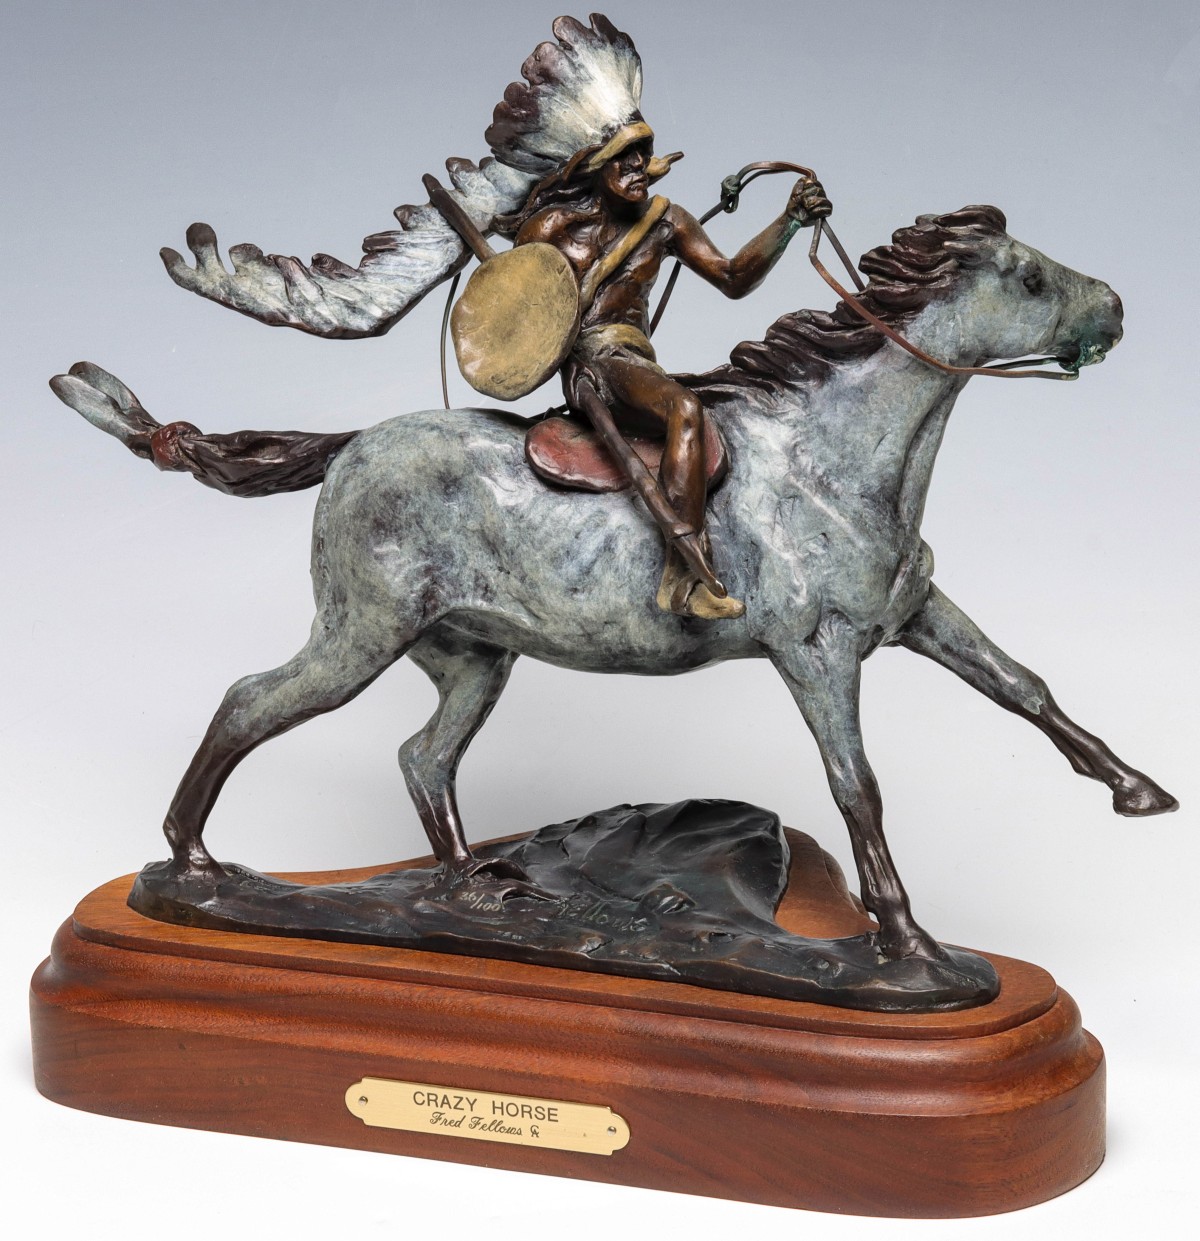 FRED FELLOWS (B. 1934) COLD PAINTED WESTERN BRONZE